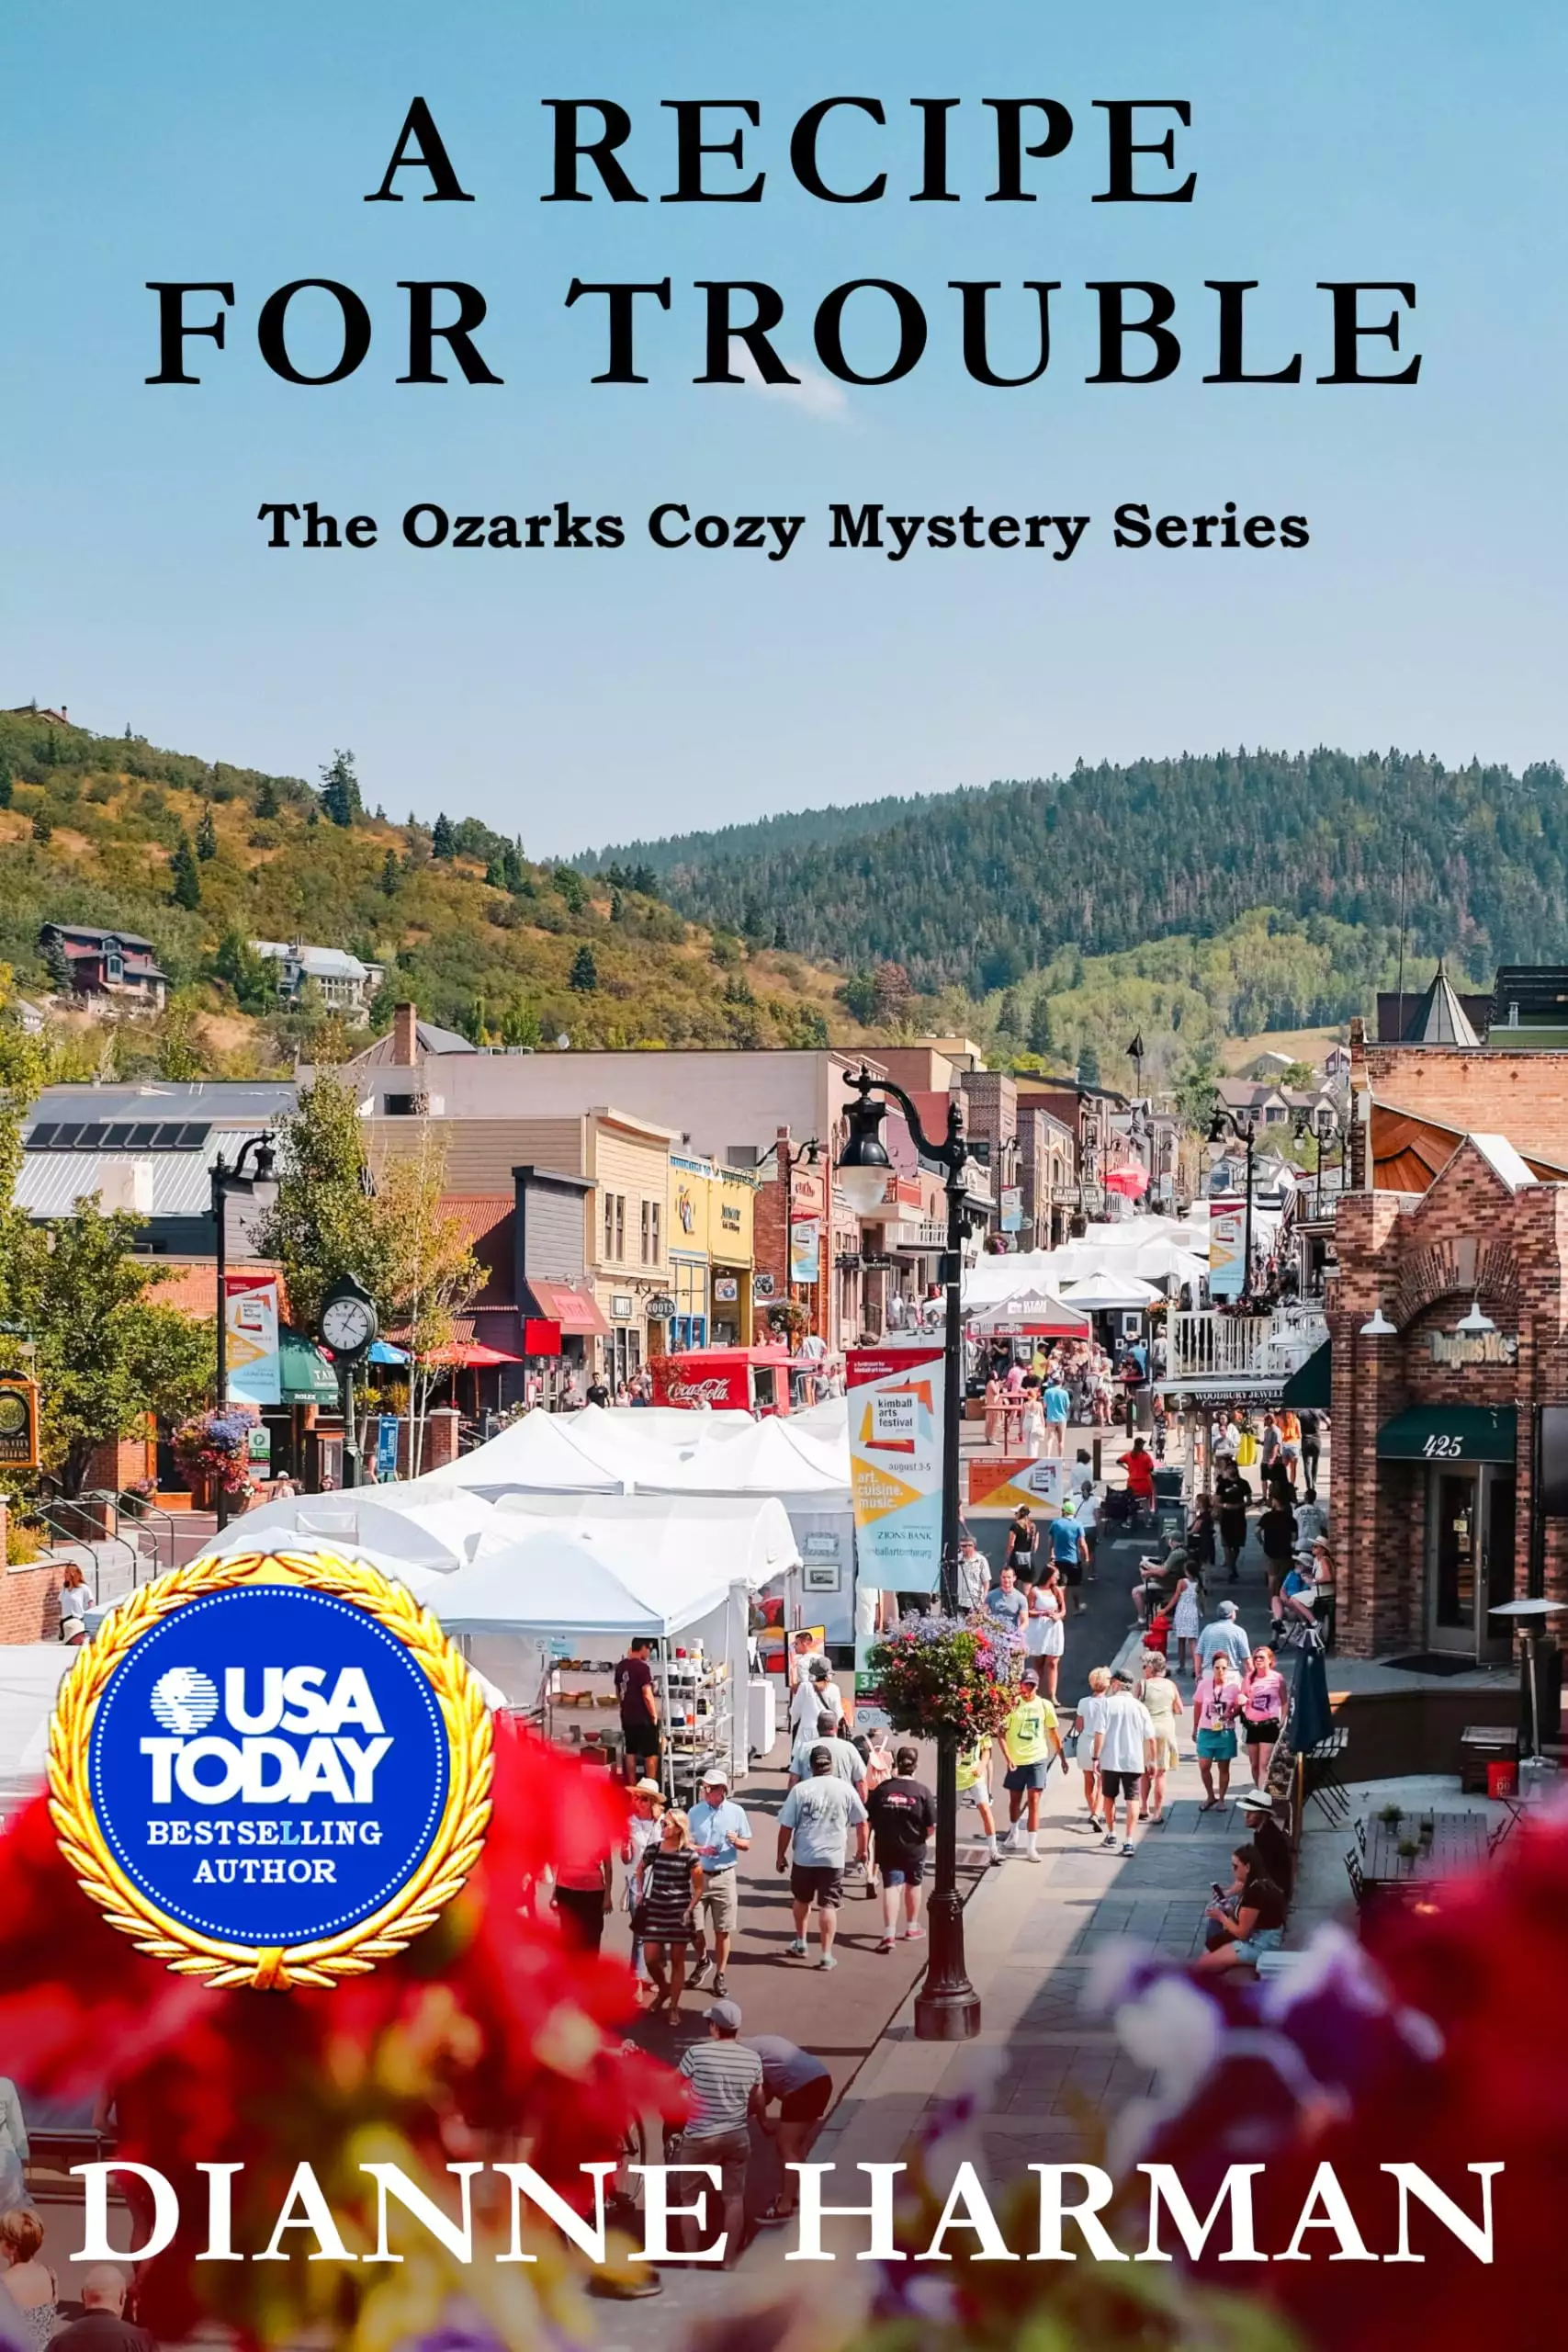 A Recipe for Trouble: The Ozarks Cozy Mystery Series